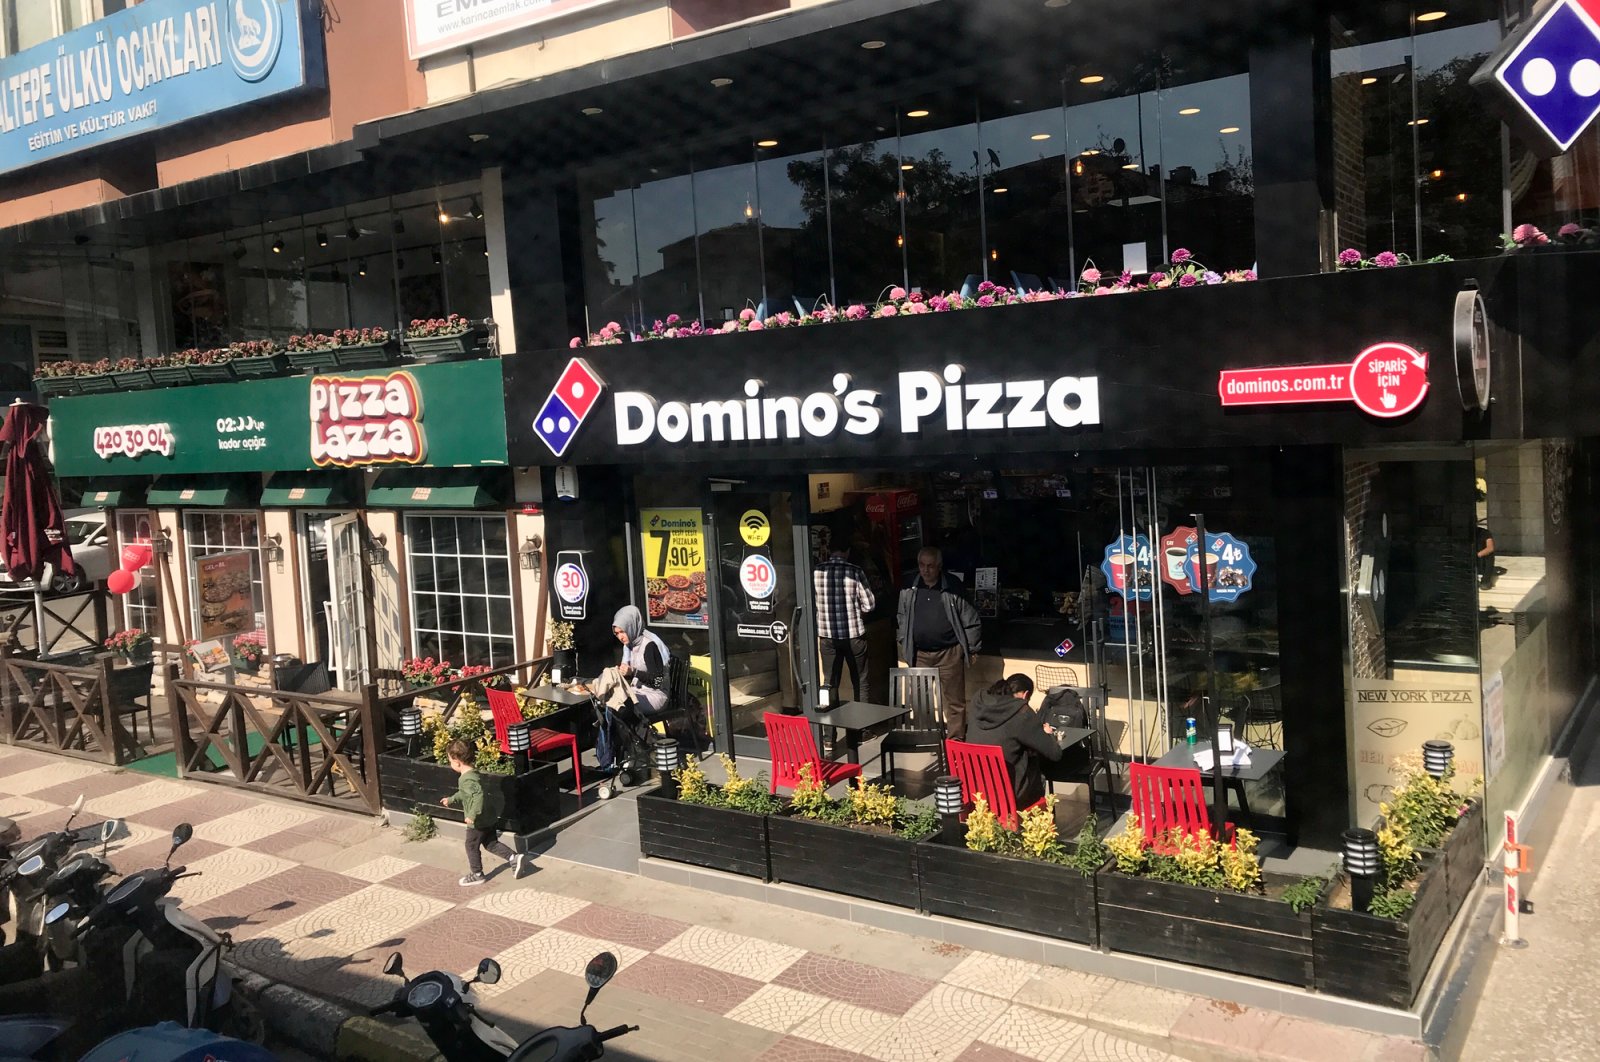 A branch of Domino's Pizza, run by DP Eurasia, is seen in the Maltepe district of Istanbul, Turkey, Oct. 11, 2017. (iStock Photo)